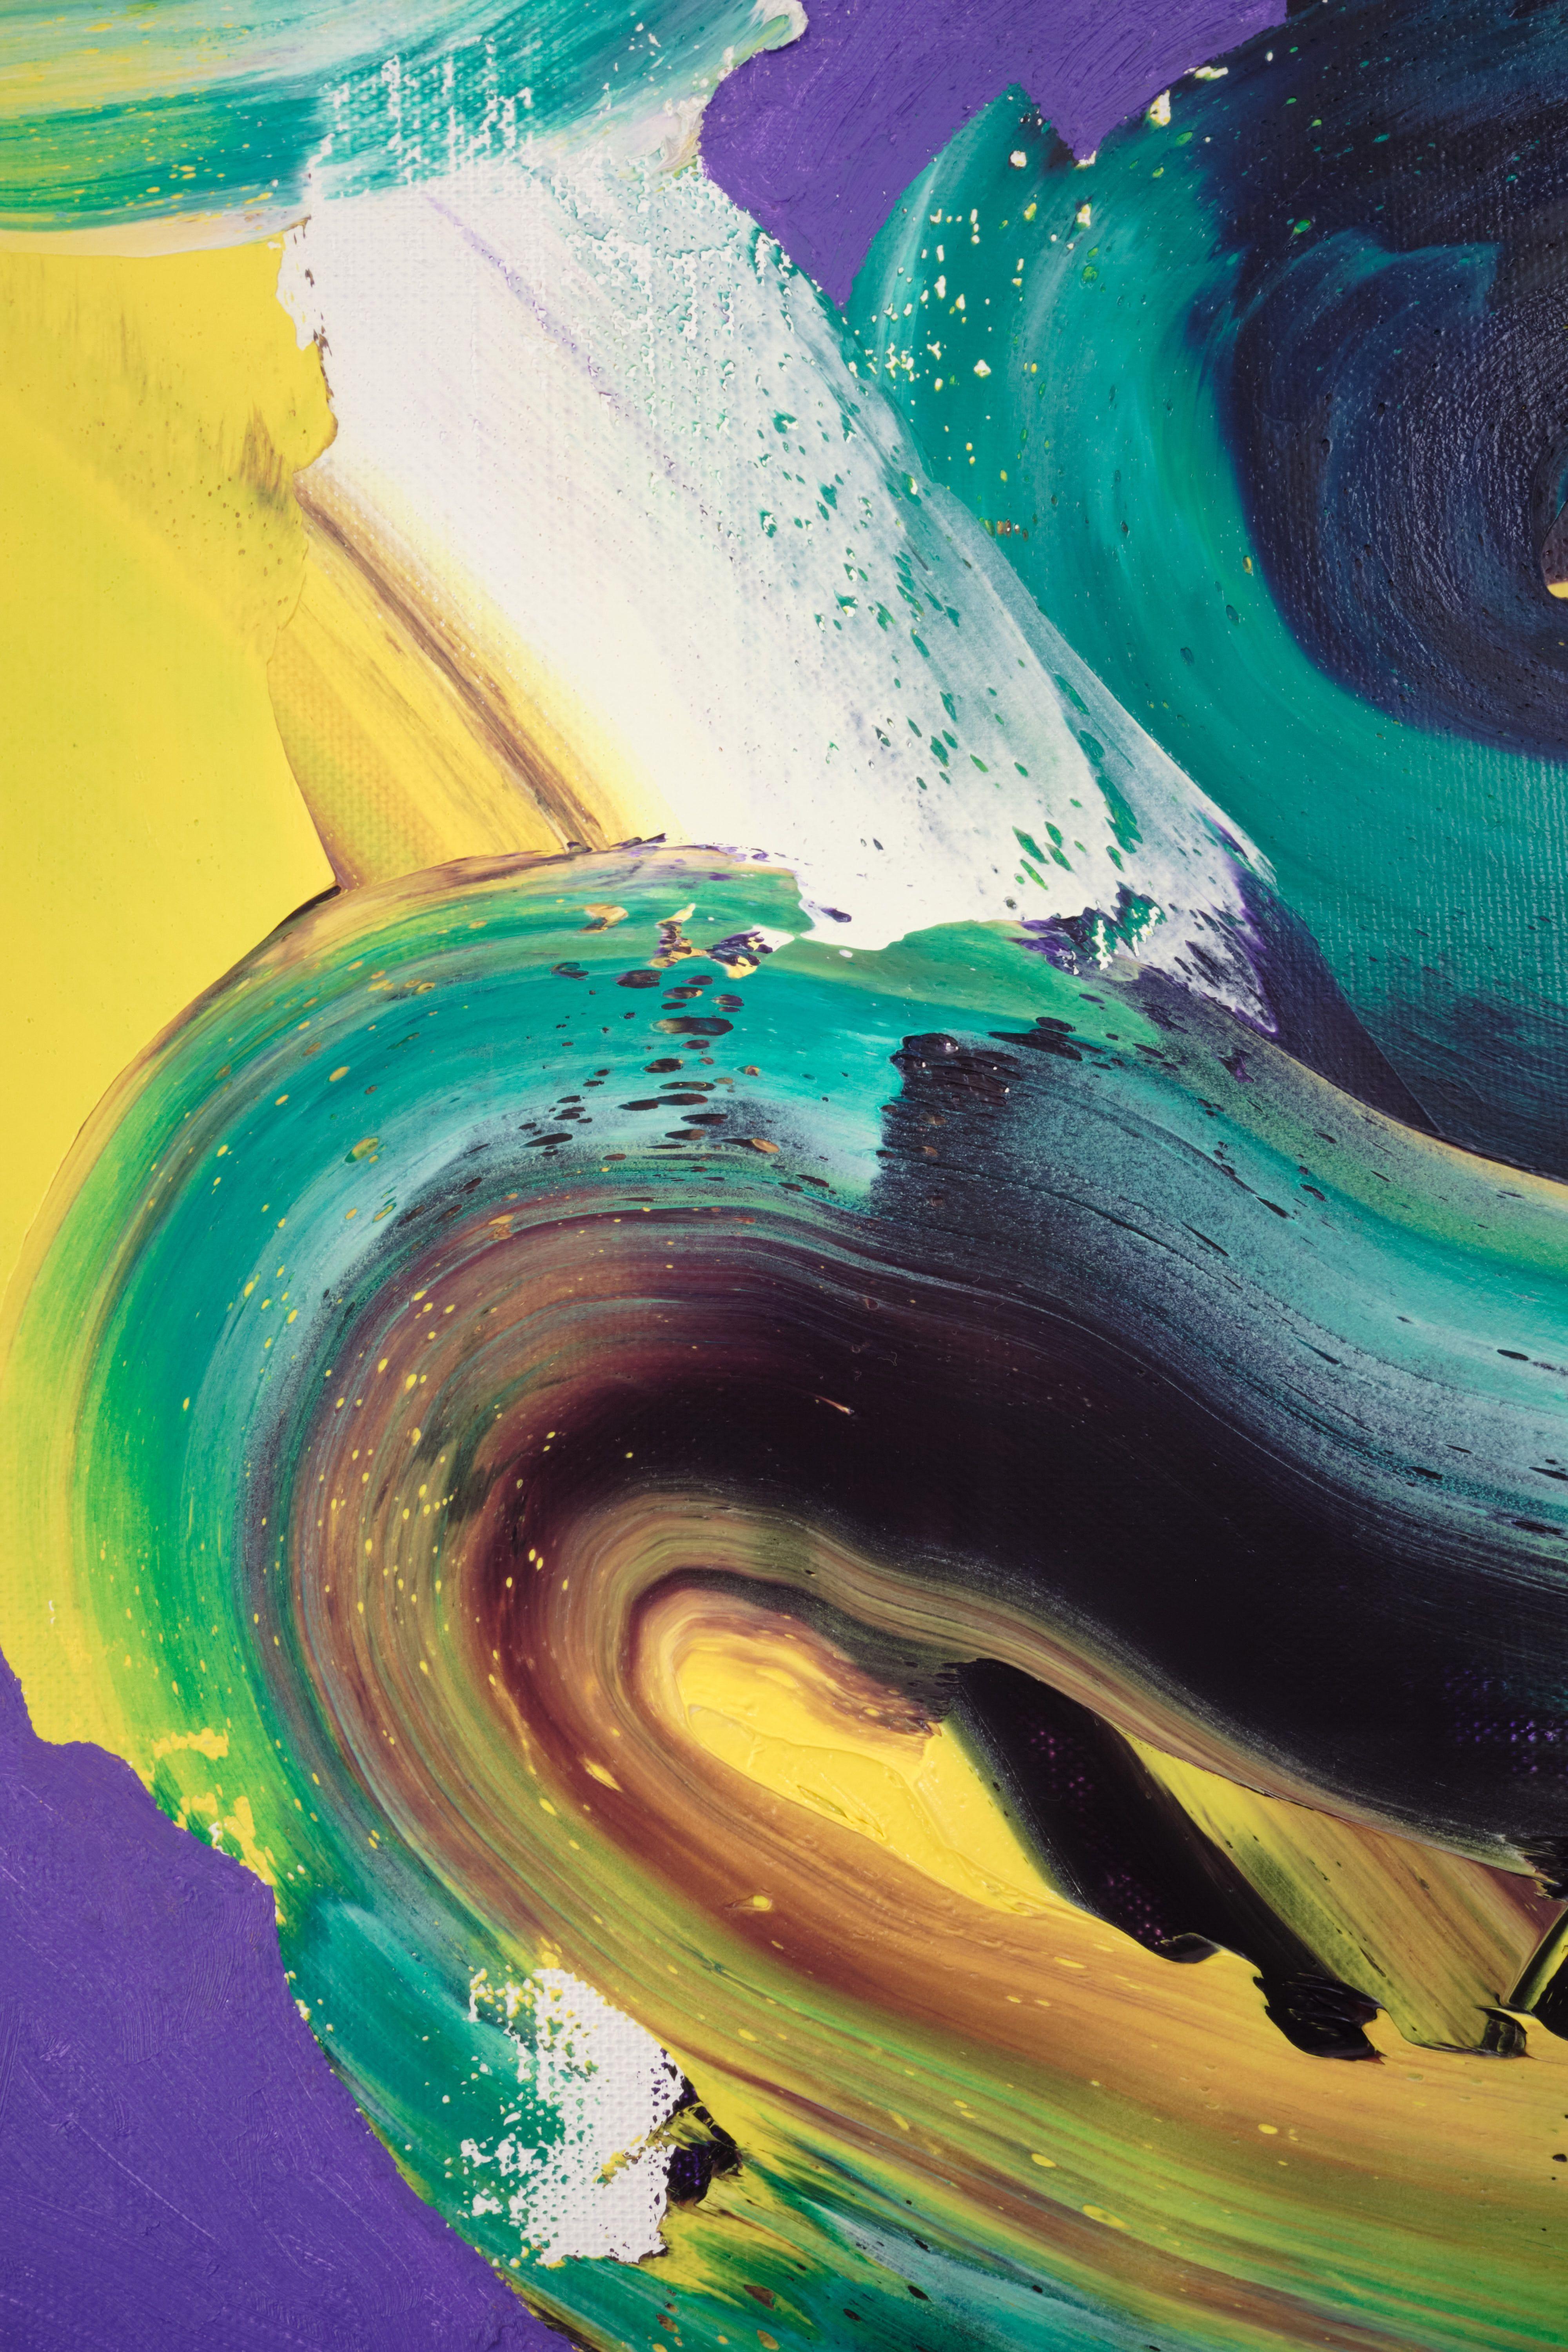 Yellow and turquoise on purple.  Oil paint was pushed around in swirl-like motions with a palette knife, followed by adding purple to the background. This is part of the artistâ€™s ongoing practice, where he intuitively paints for a few hours each